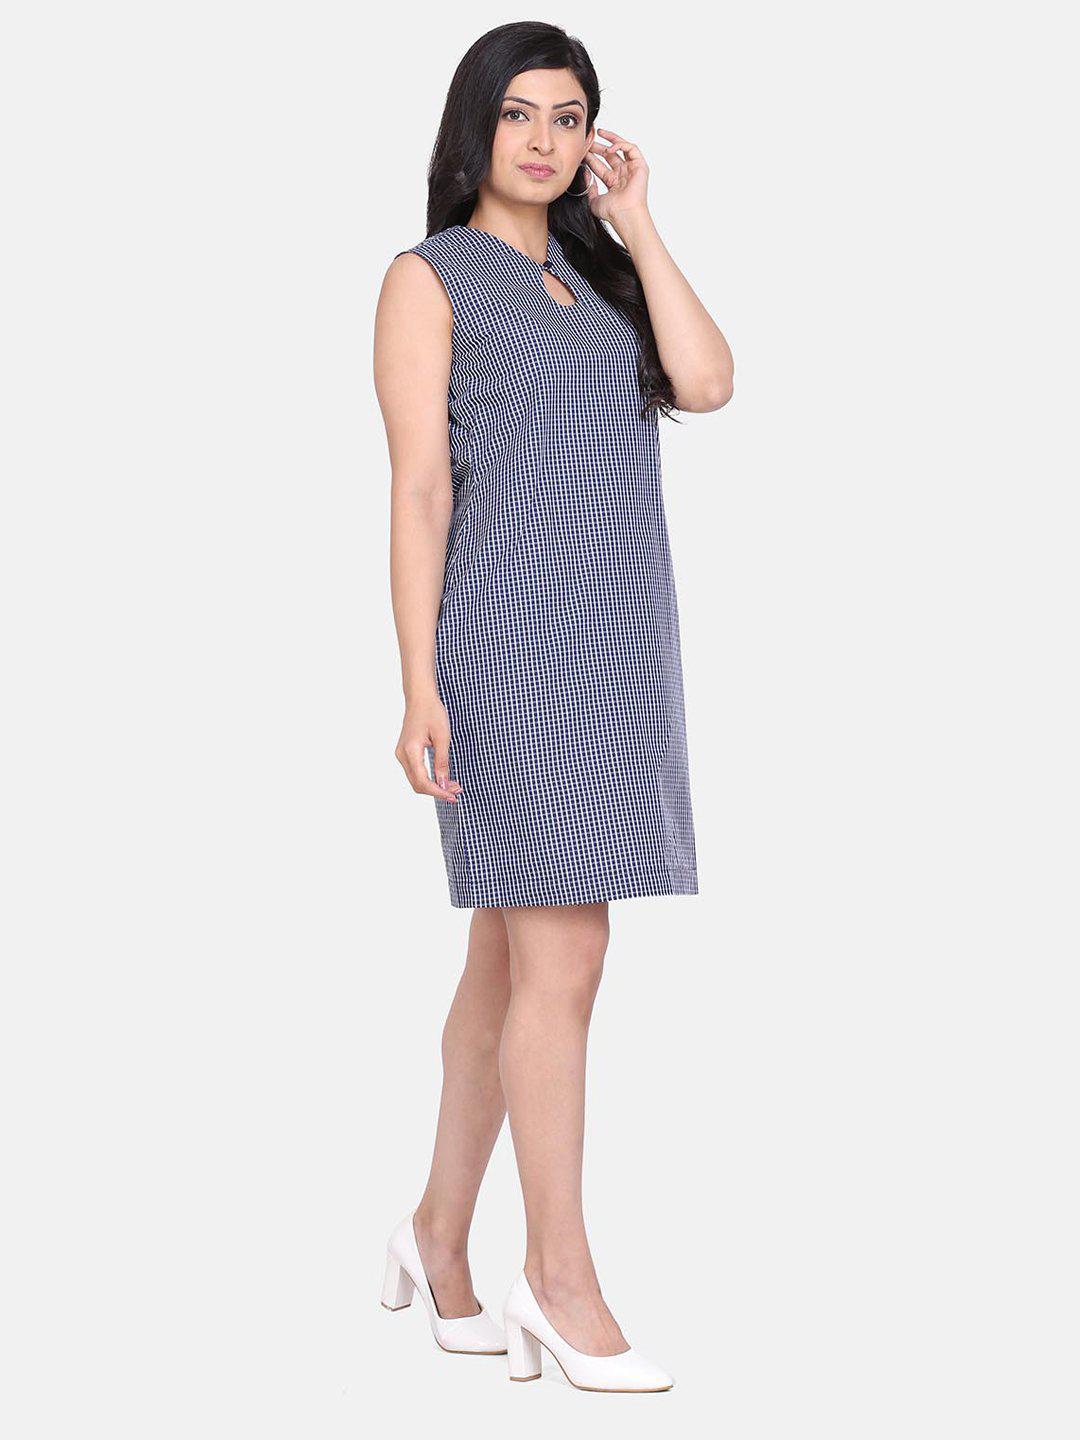 Gingham Check Cotton Shift Dress For Women - Blue and White